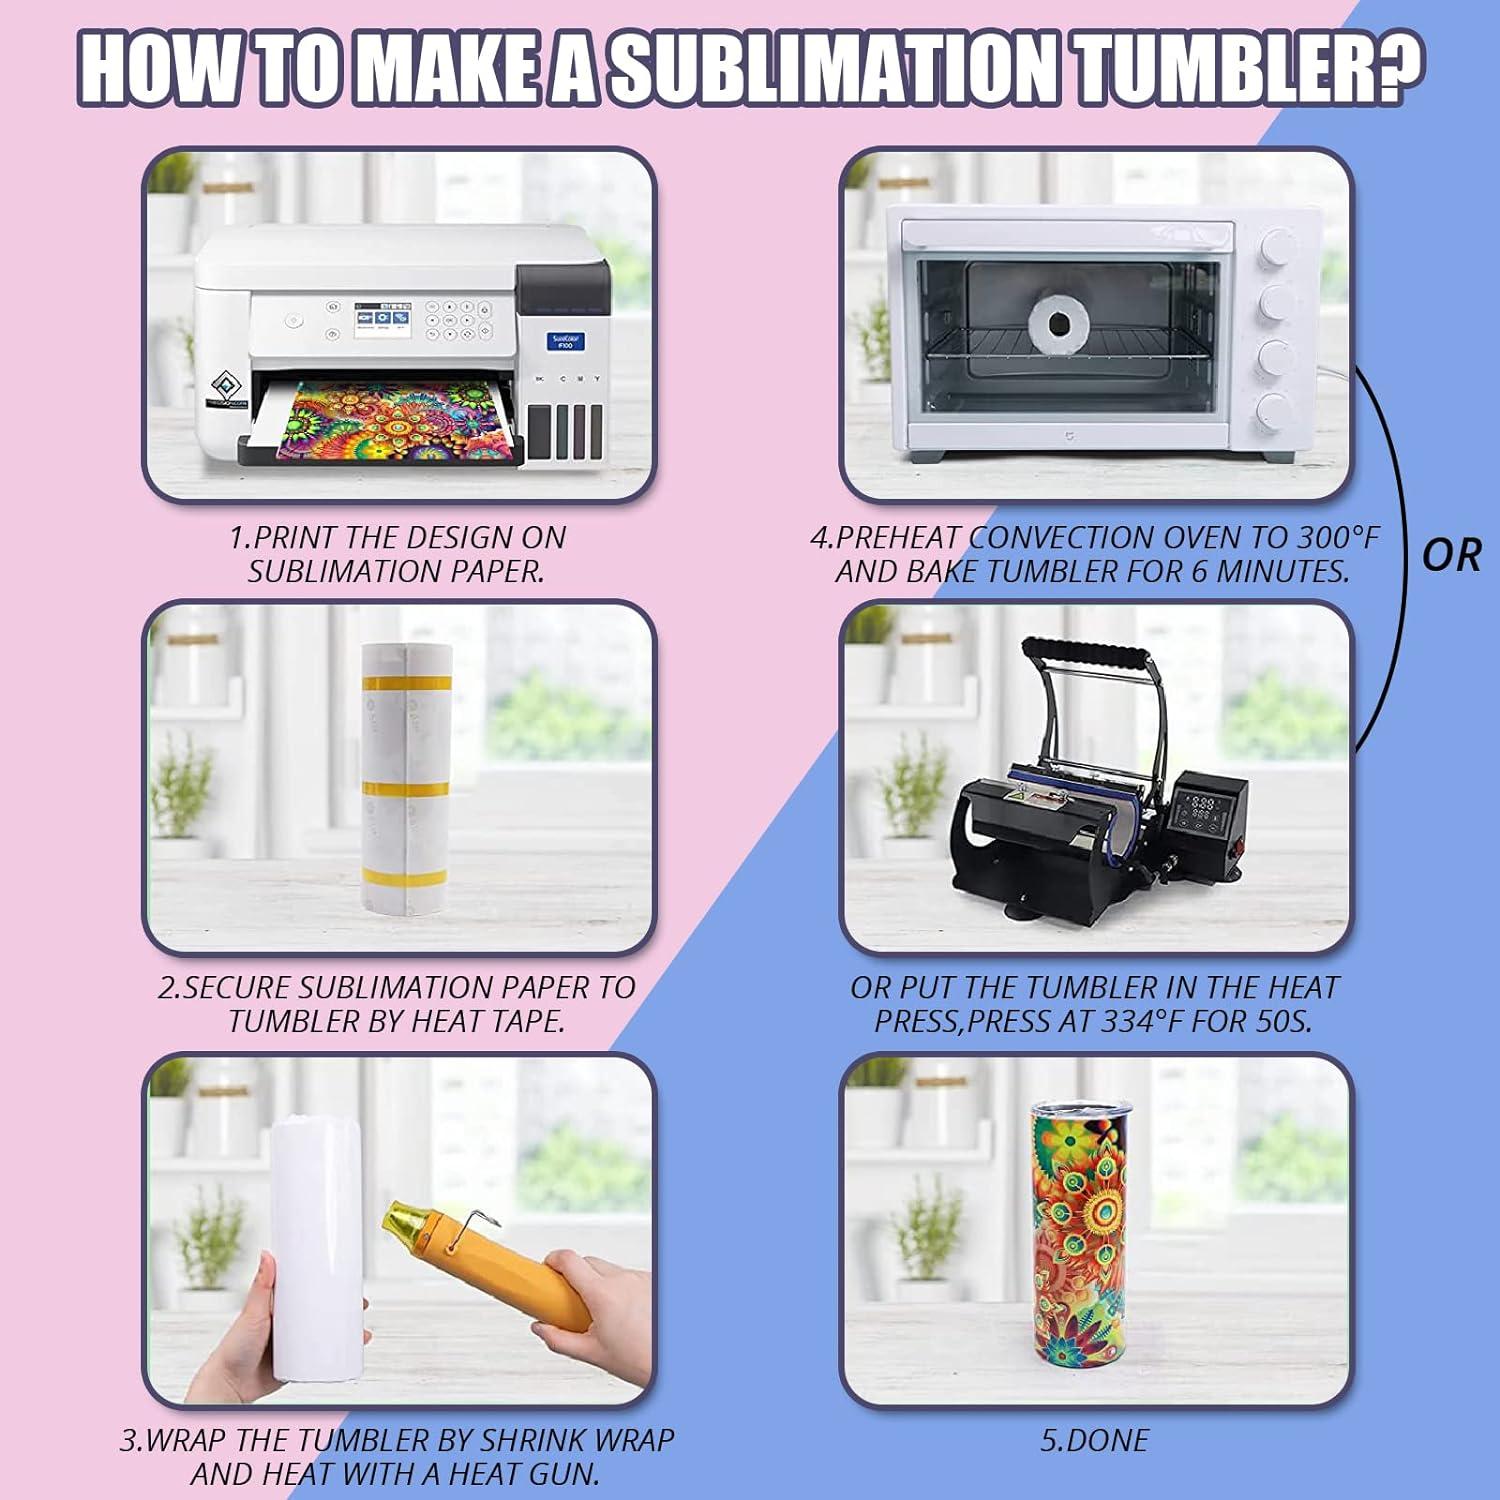 How to Sublimate Tumblers in Convection Oven (Time, Temperature